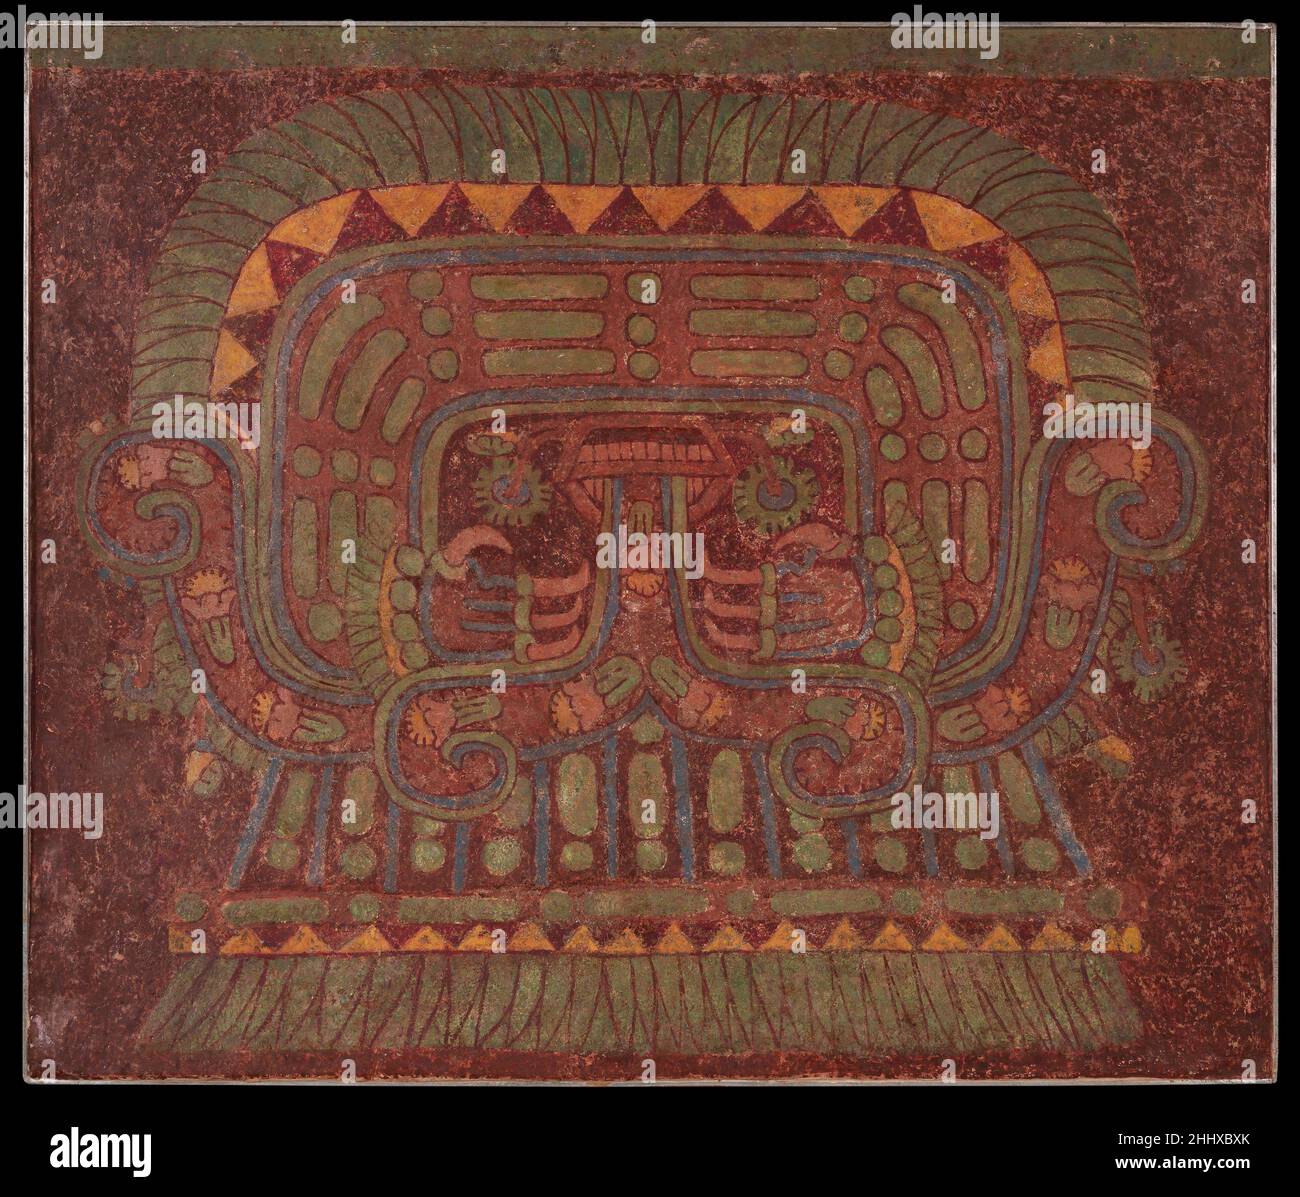 Wall Painting A.D. 500–550 Teotihuacan The work is a portion of a  frescolike wall painting from an apartment compound in the ancient Mexican  city of Teotihuacan. In the first millennium A.D., residents